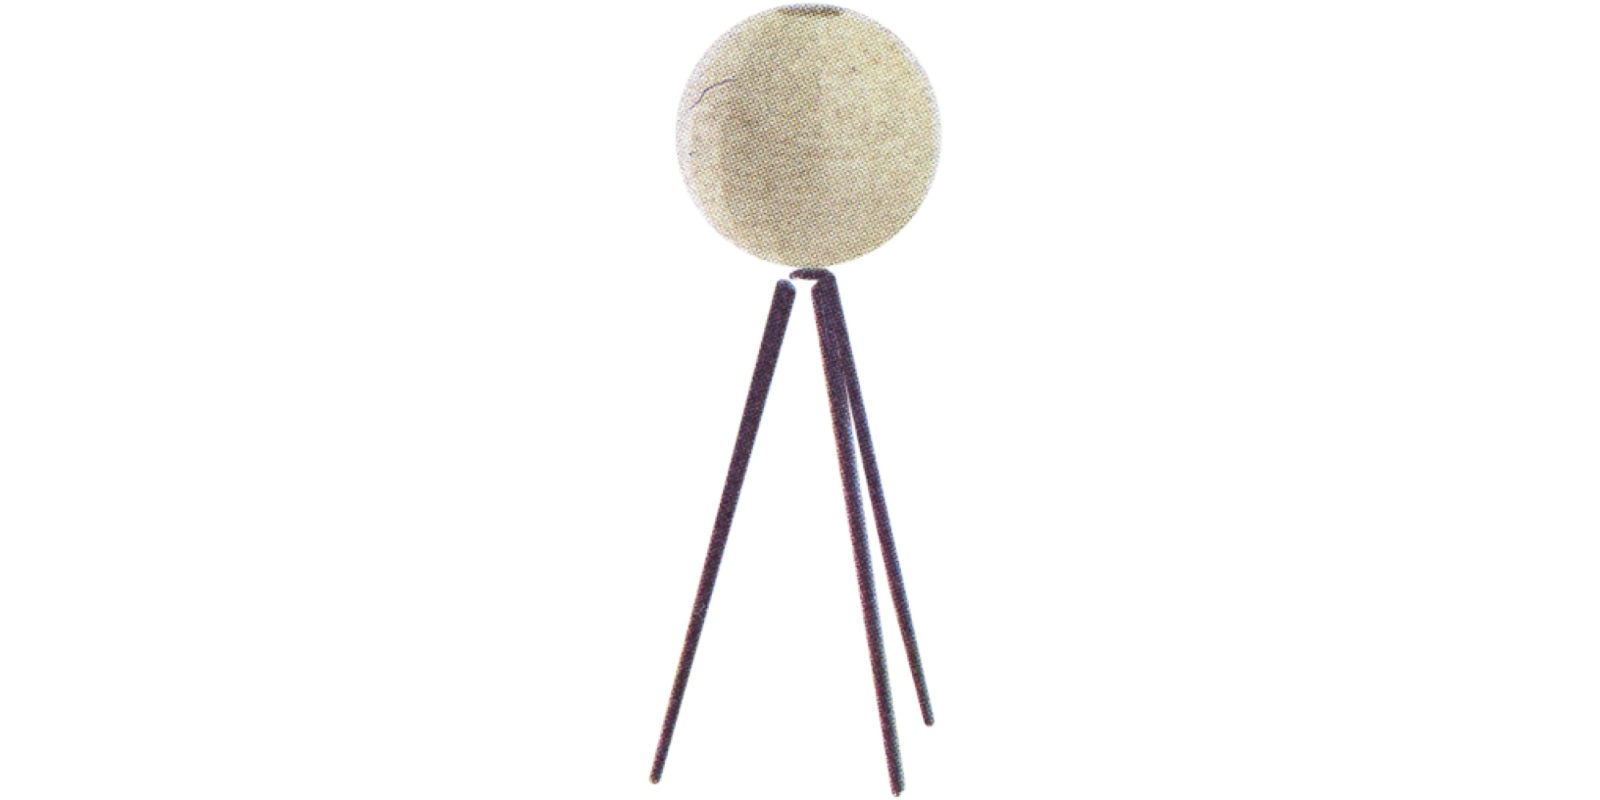 Lamp with a round bast-wrapped shade supported by three black-lacquered legs.